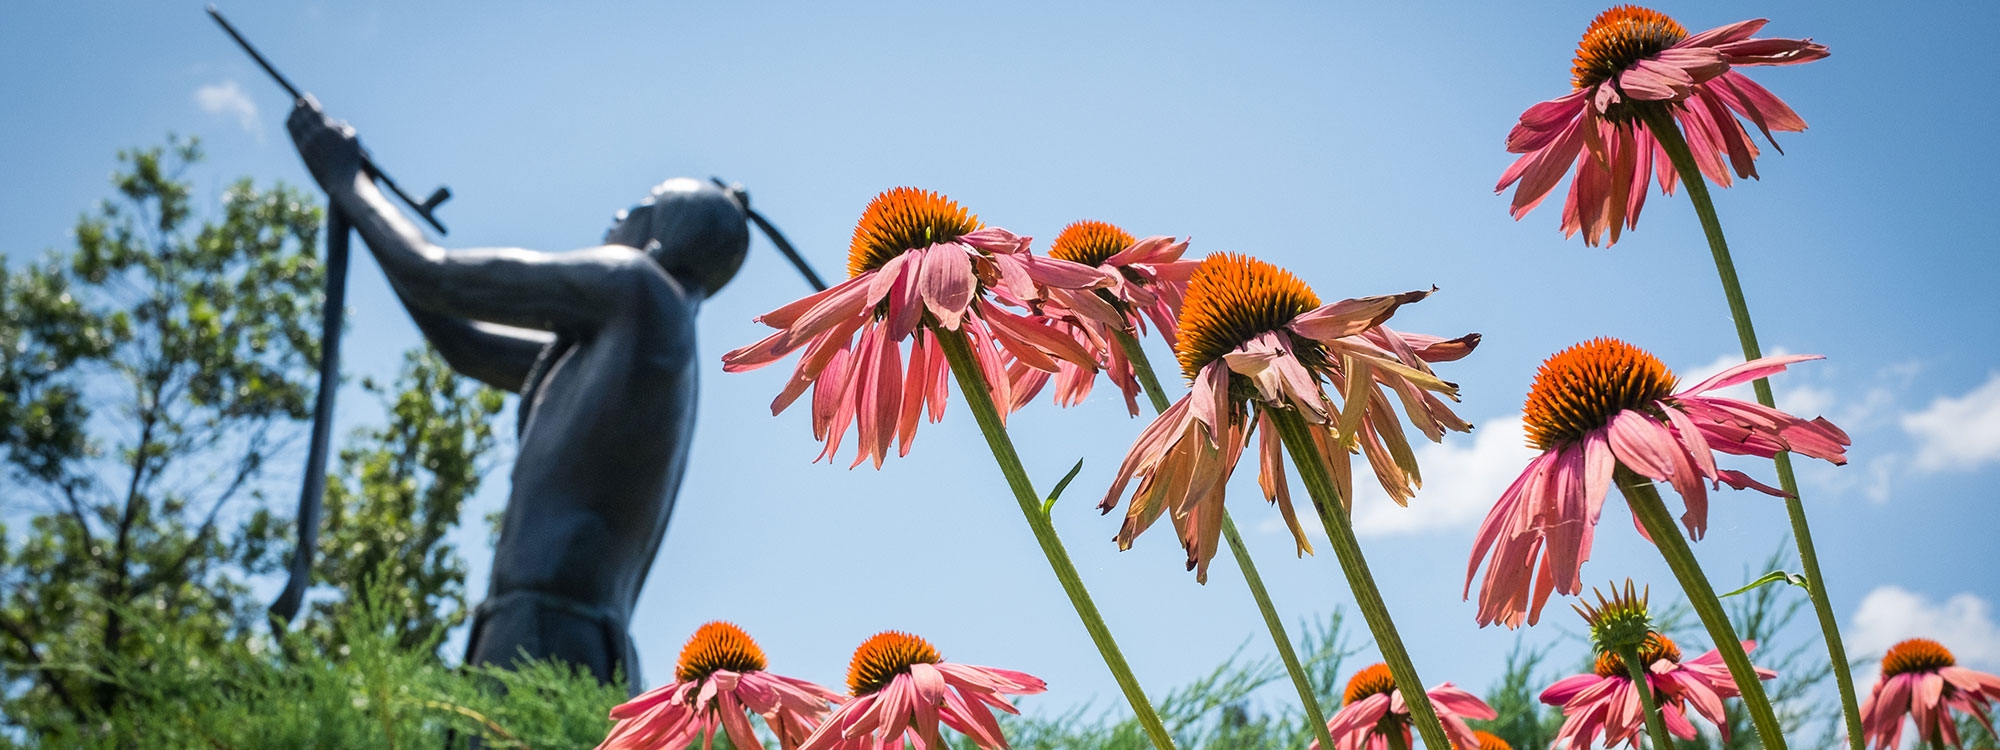 Alan Houser statue, with pink flowers in the foreground and a blue sky.